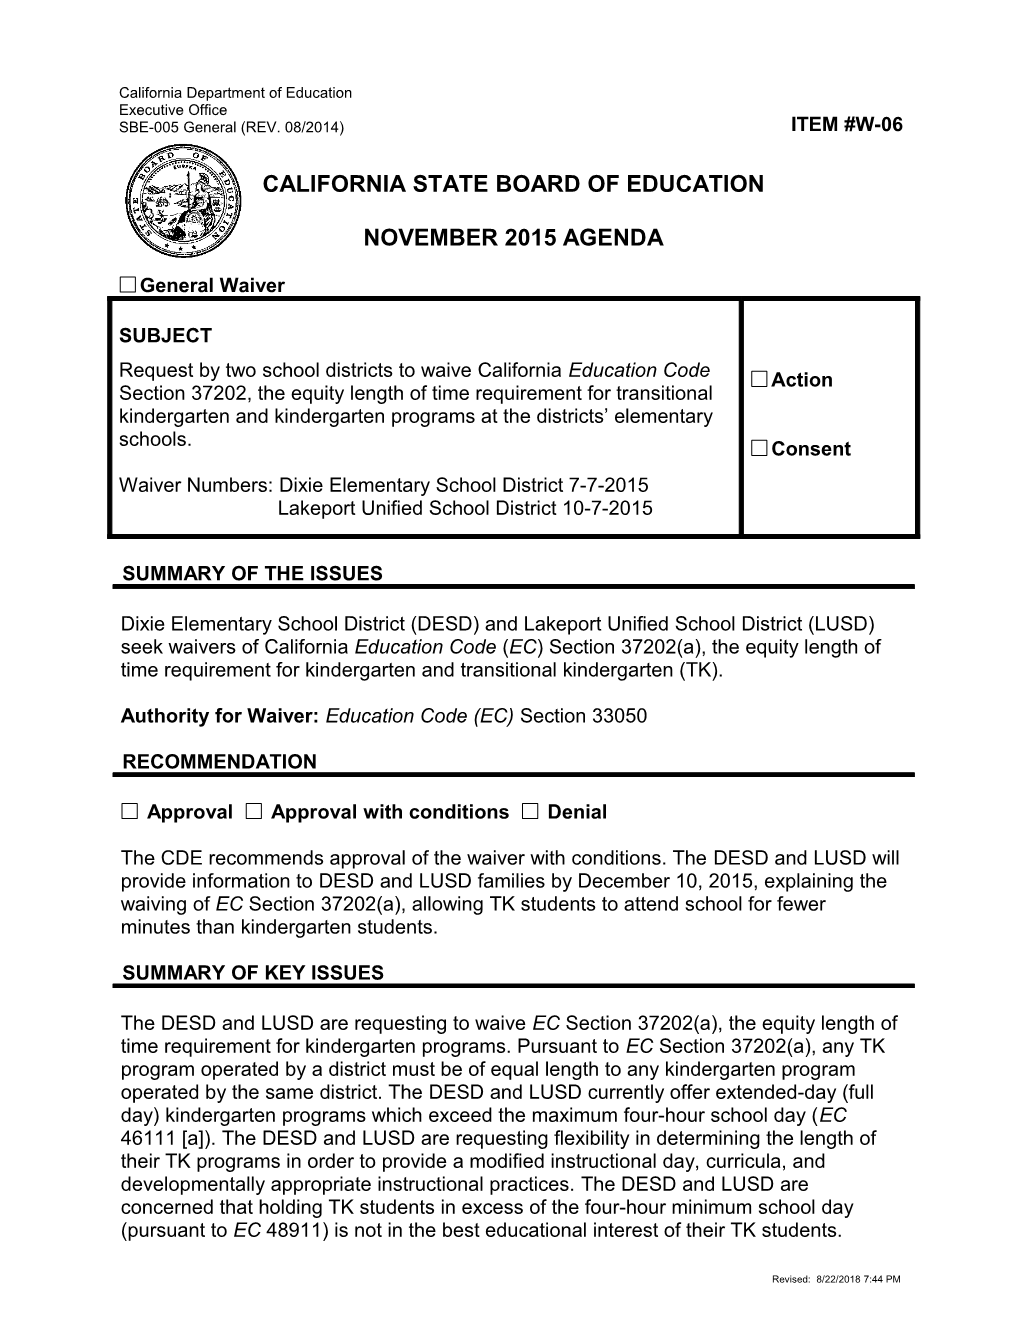 November 2015 Waiver Item W-06 - Meeting Agendas (CA State Board of Education)